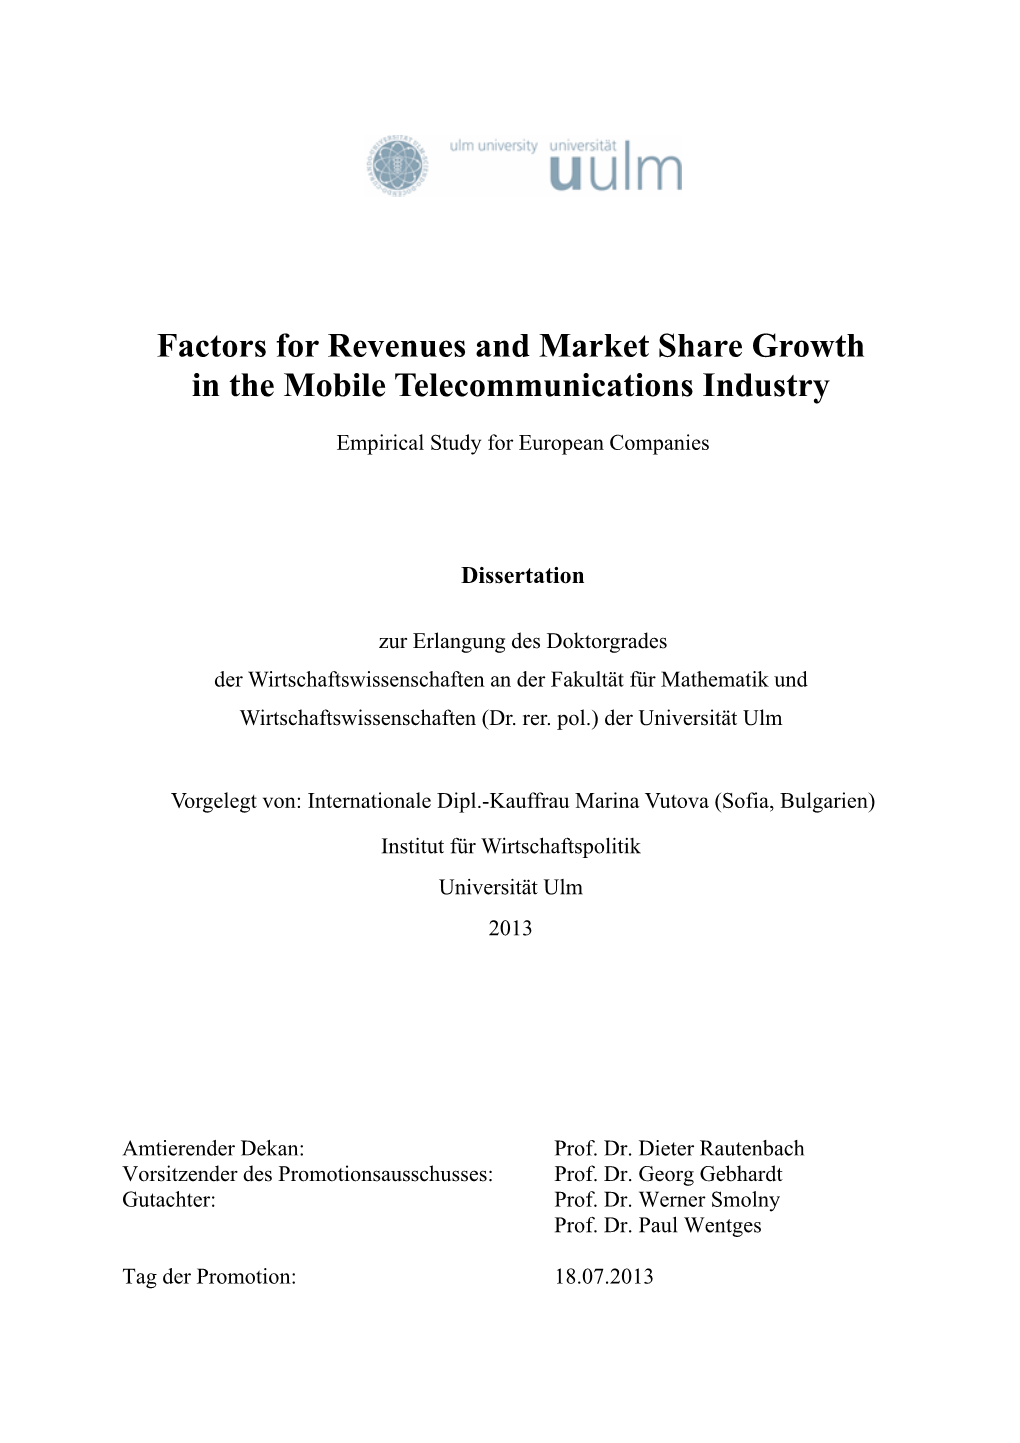 Factors for Revenues and Market Share Growth in the Mobile Telecommunications Industry